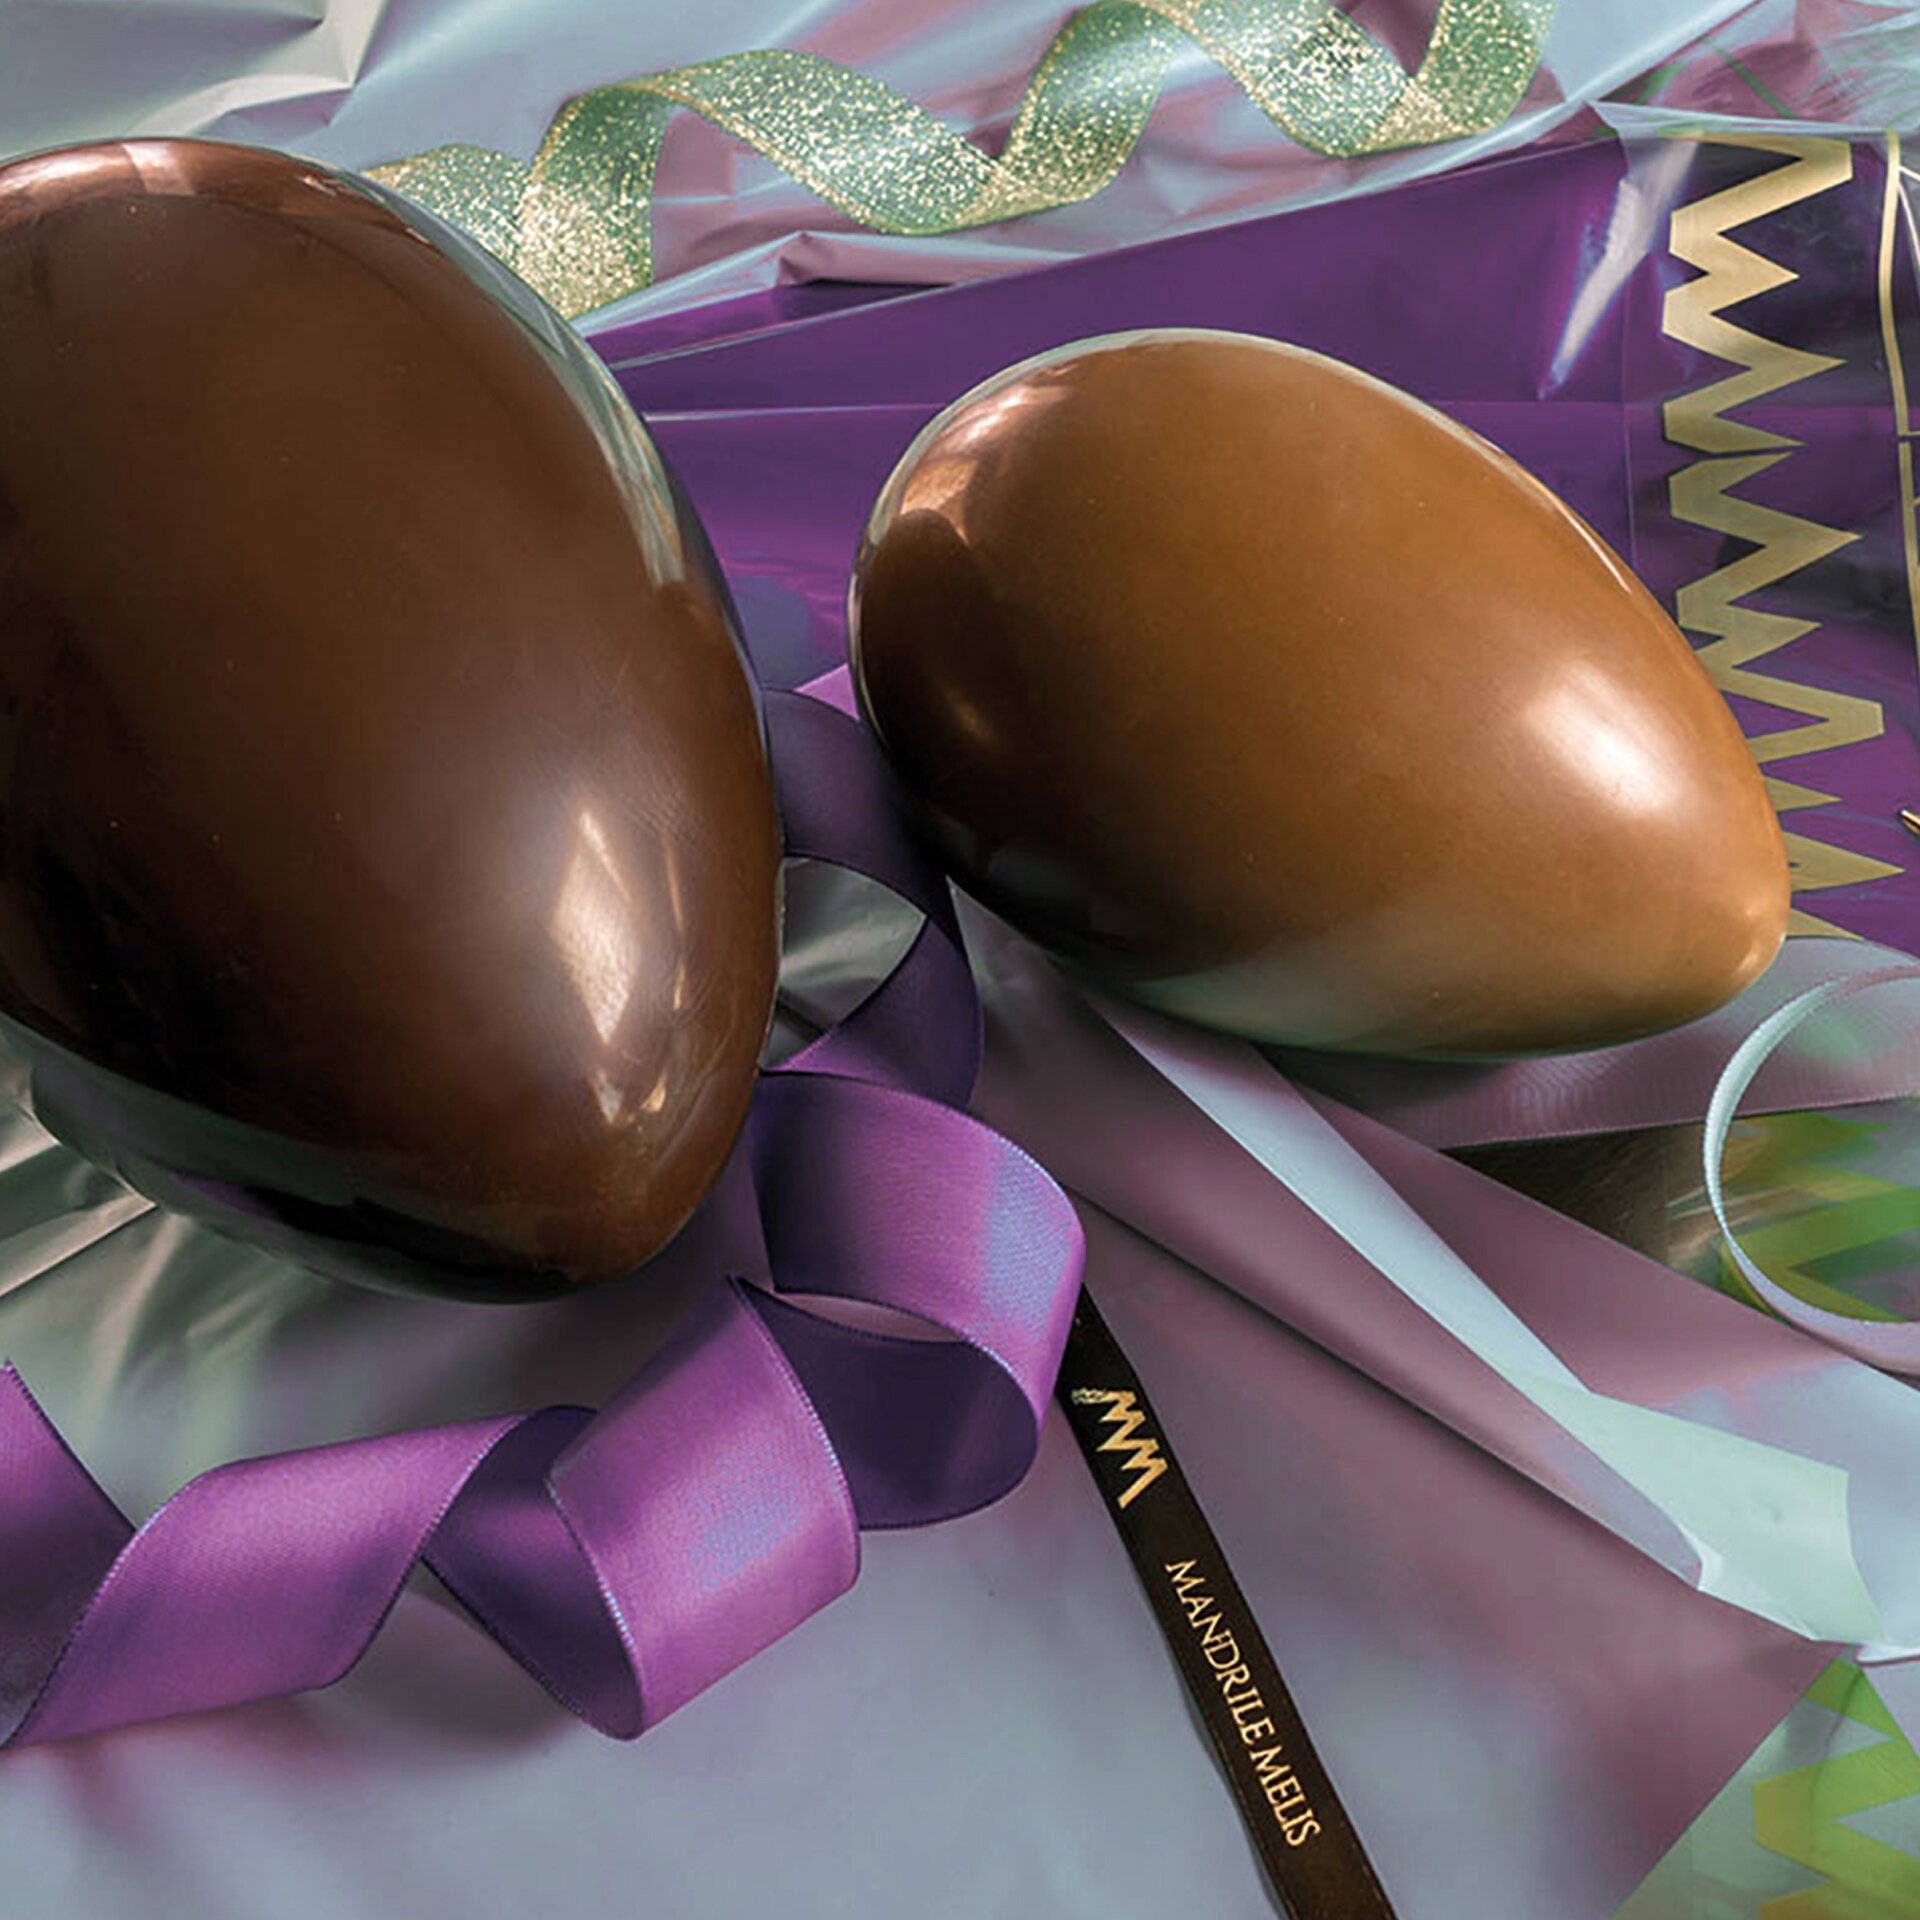 Dark Chocolate Egg lilac wrapping